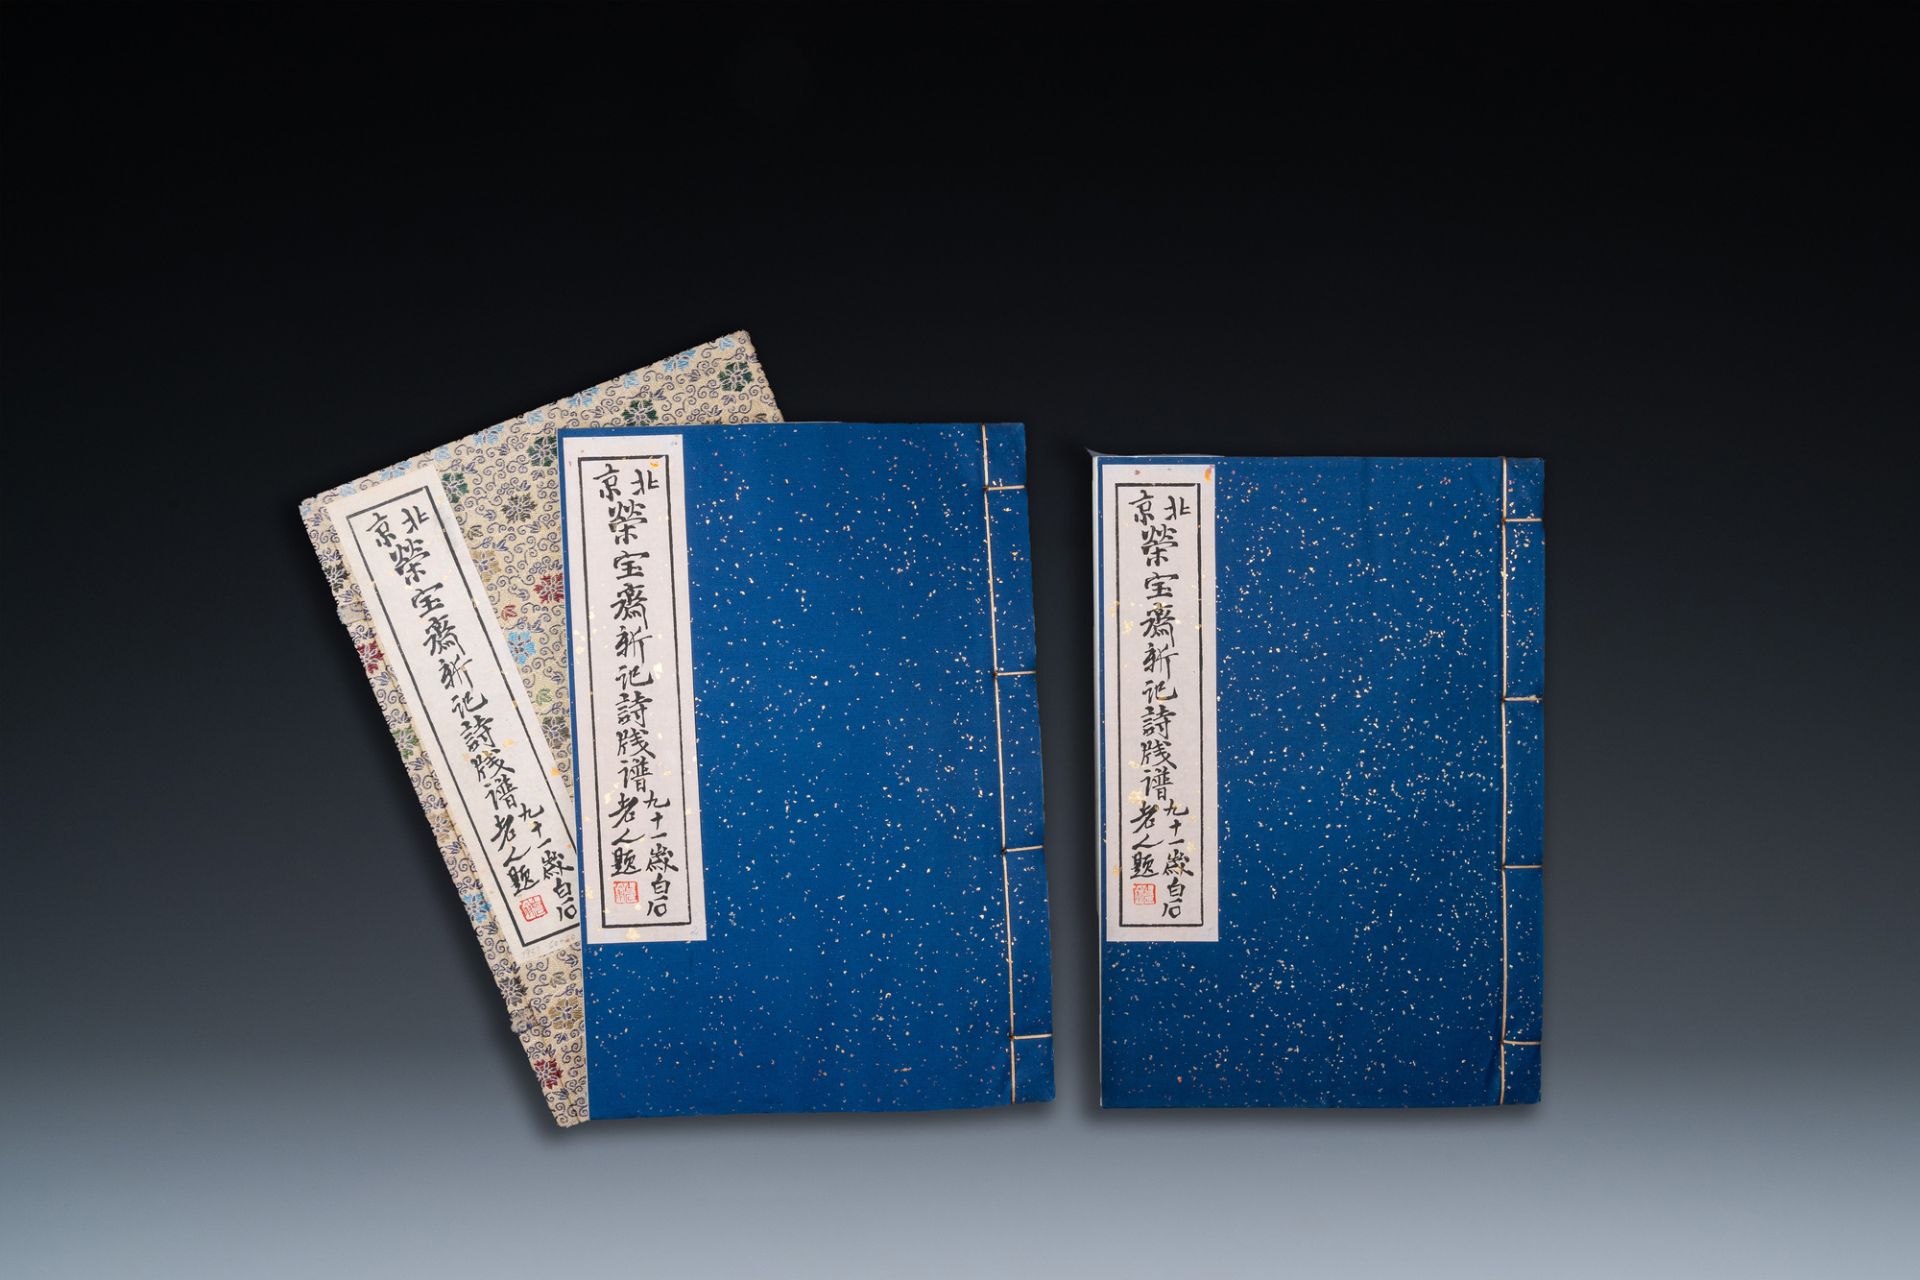 A box with two albums containing 120 woodblocks, 44 of which after Qi Baishi, Rong Bao Zhai studio,